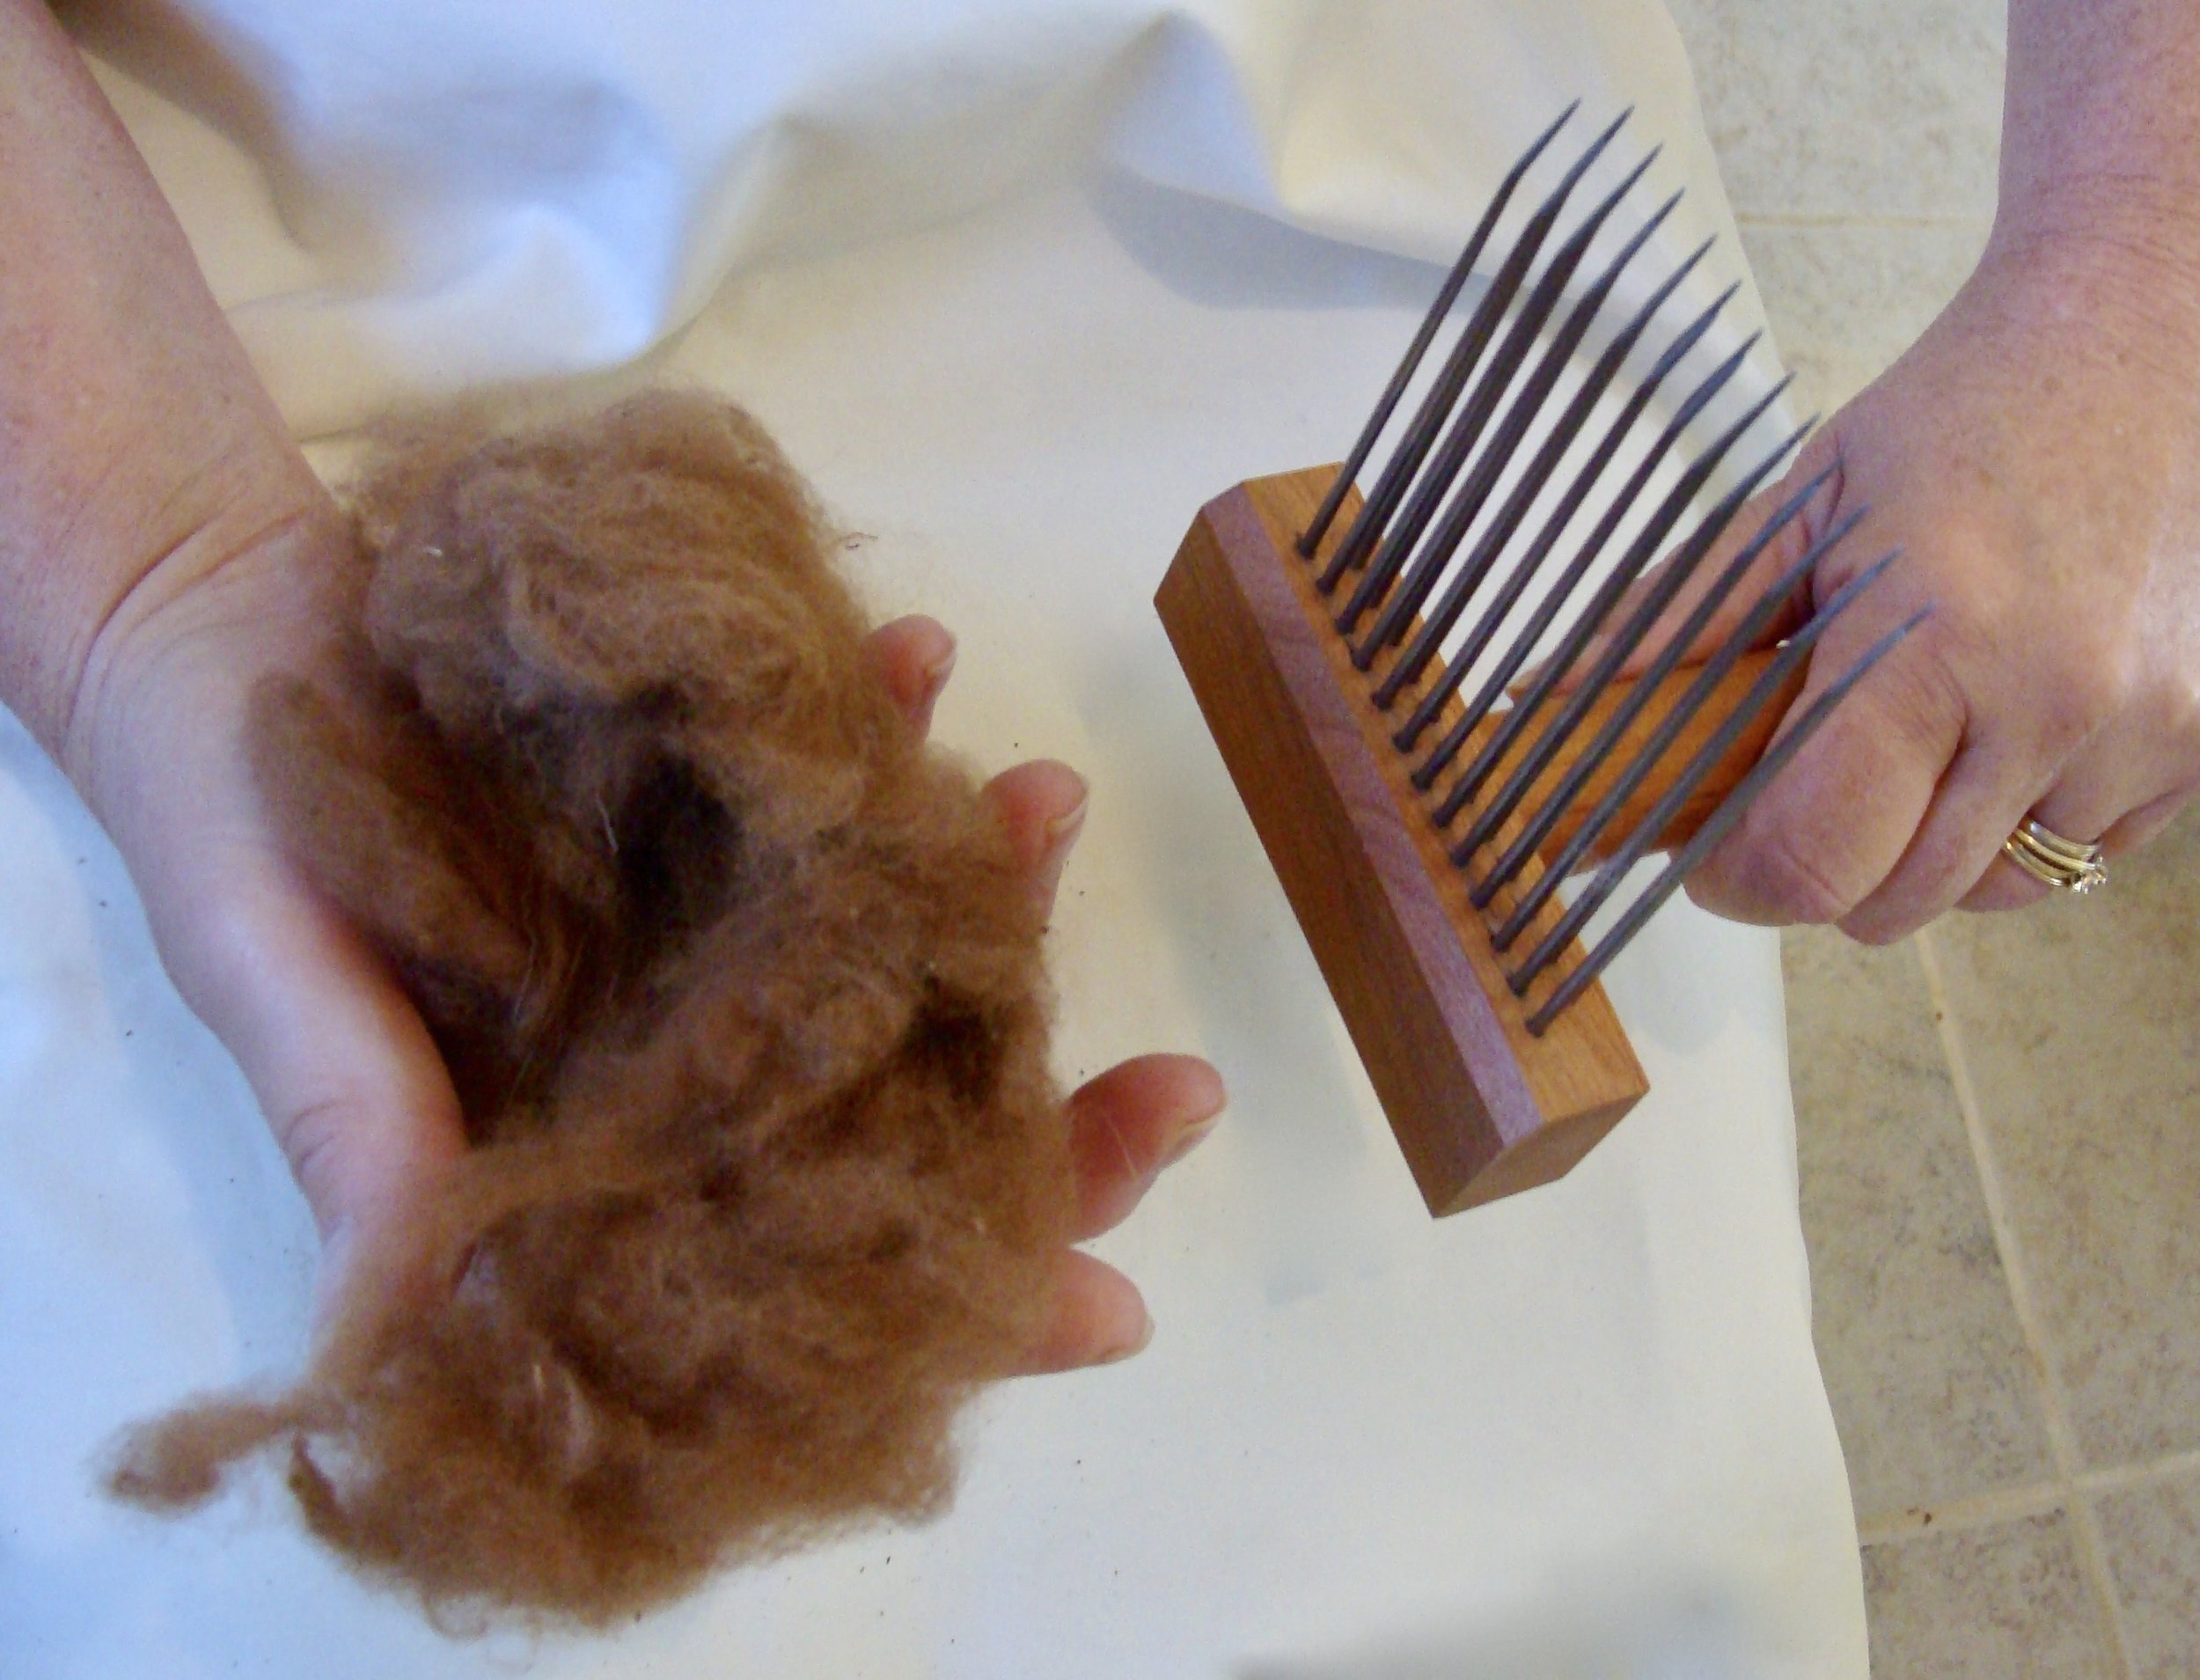 Why Alpaca Fiber Is Called Fleece Rather Than Wool! Unraveling The